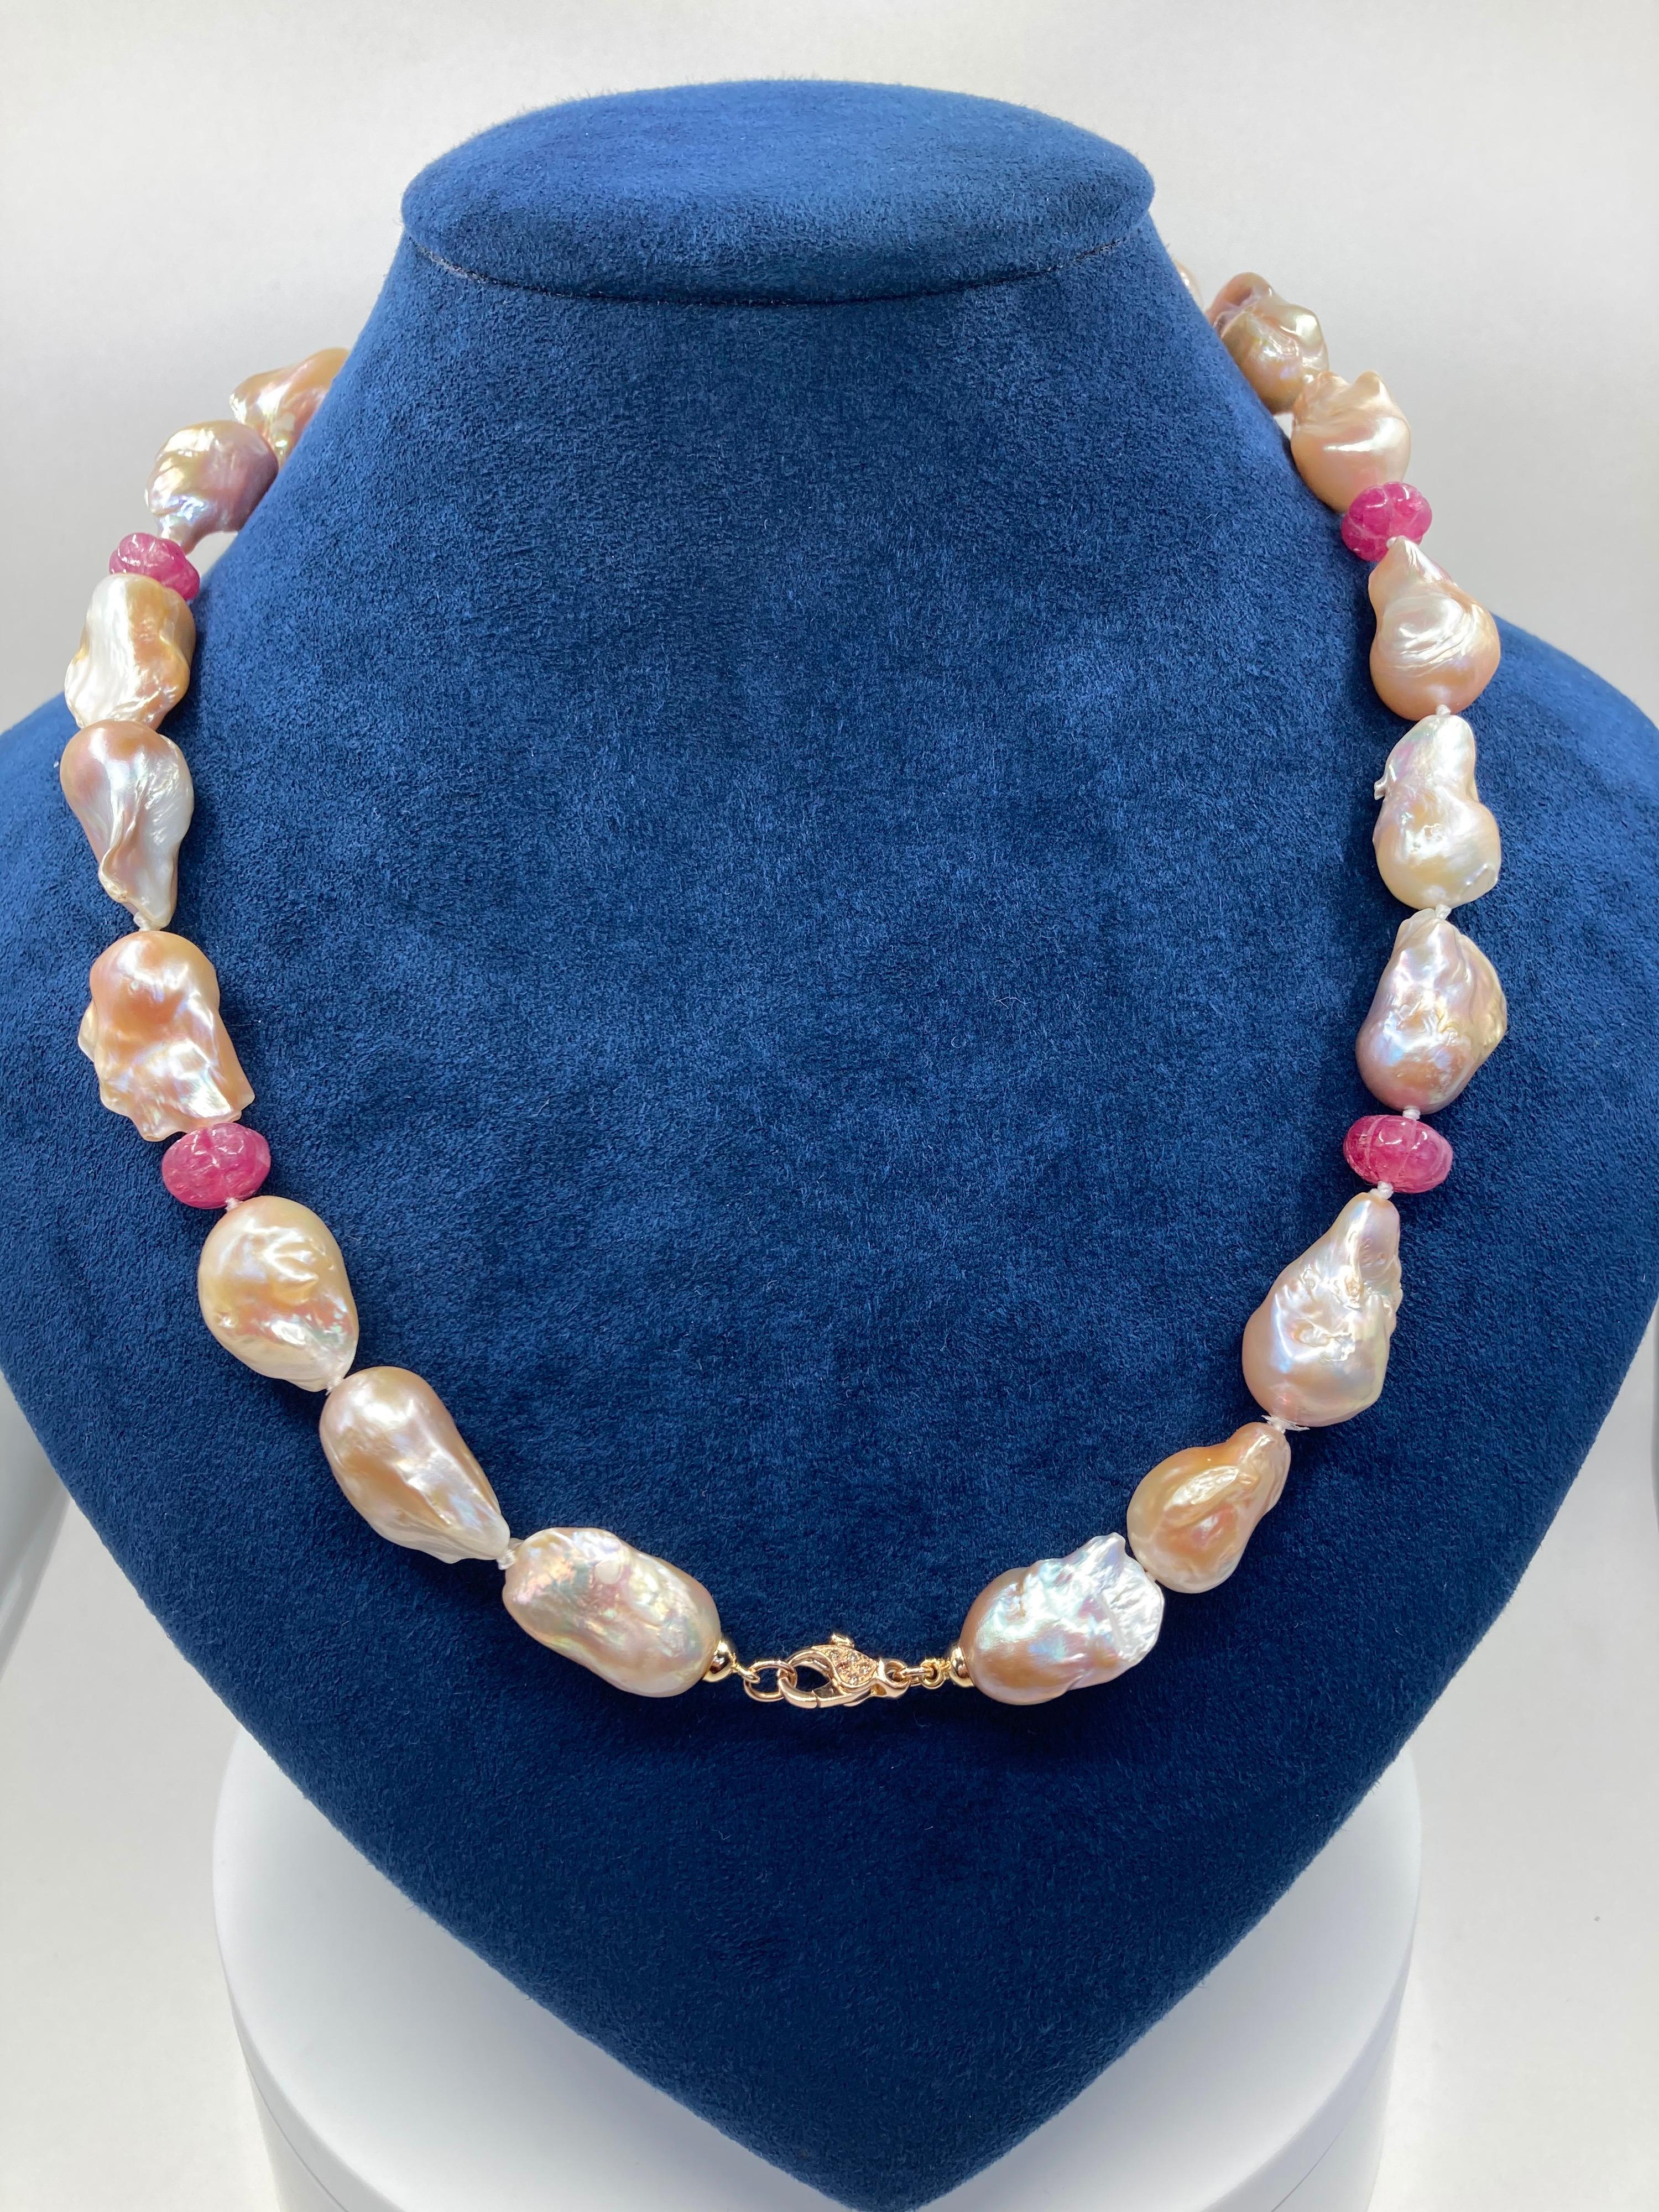 18 Karat Gold Baroque Pearls, Rubies and Brown Diamonds Necklace For Sale 1